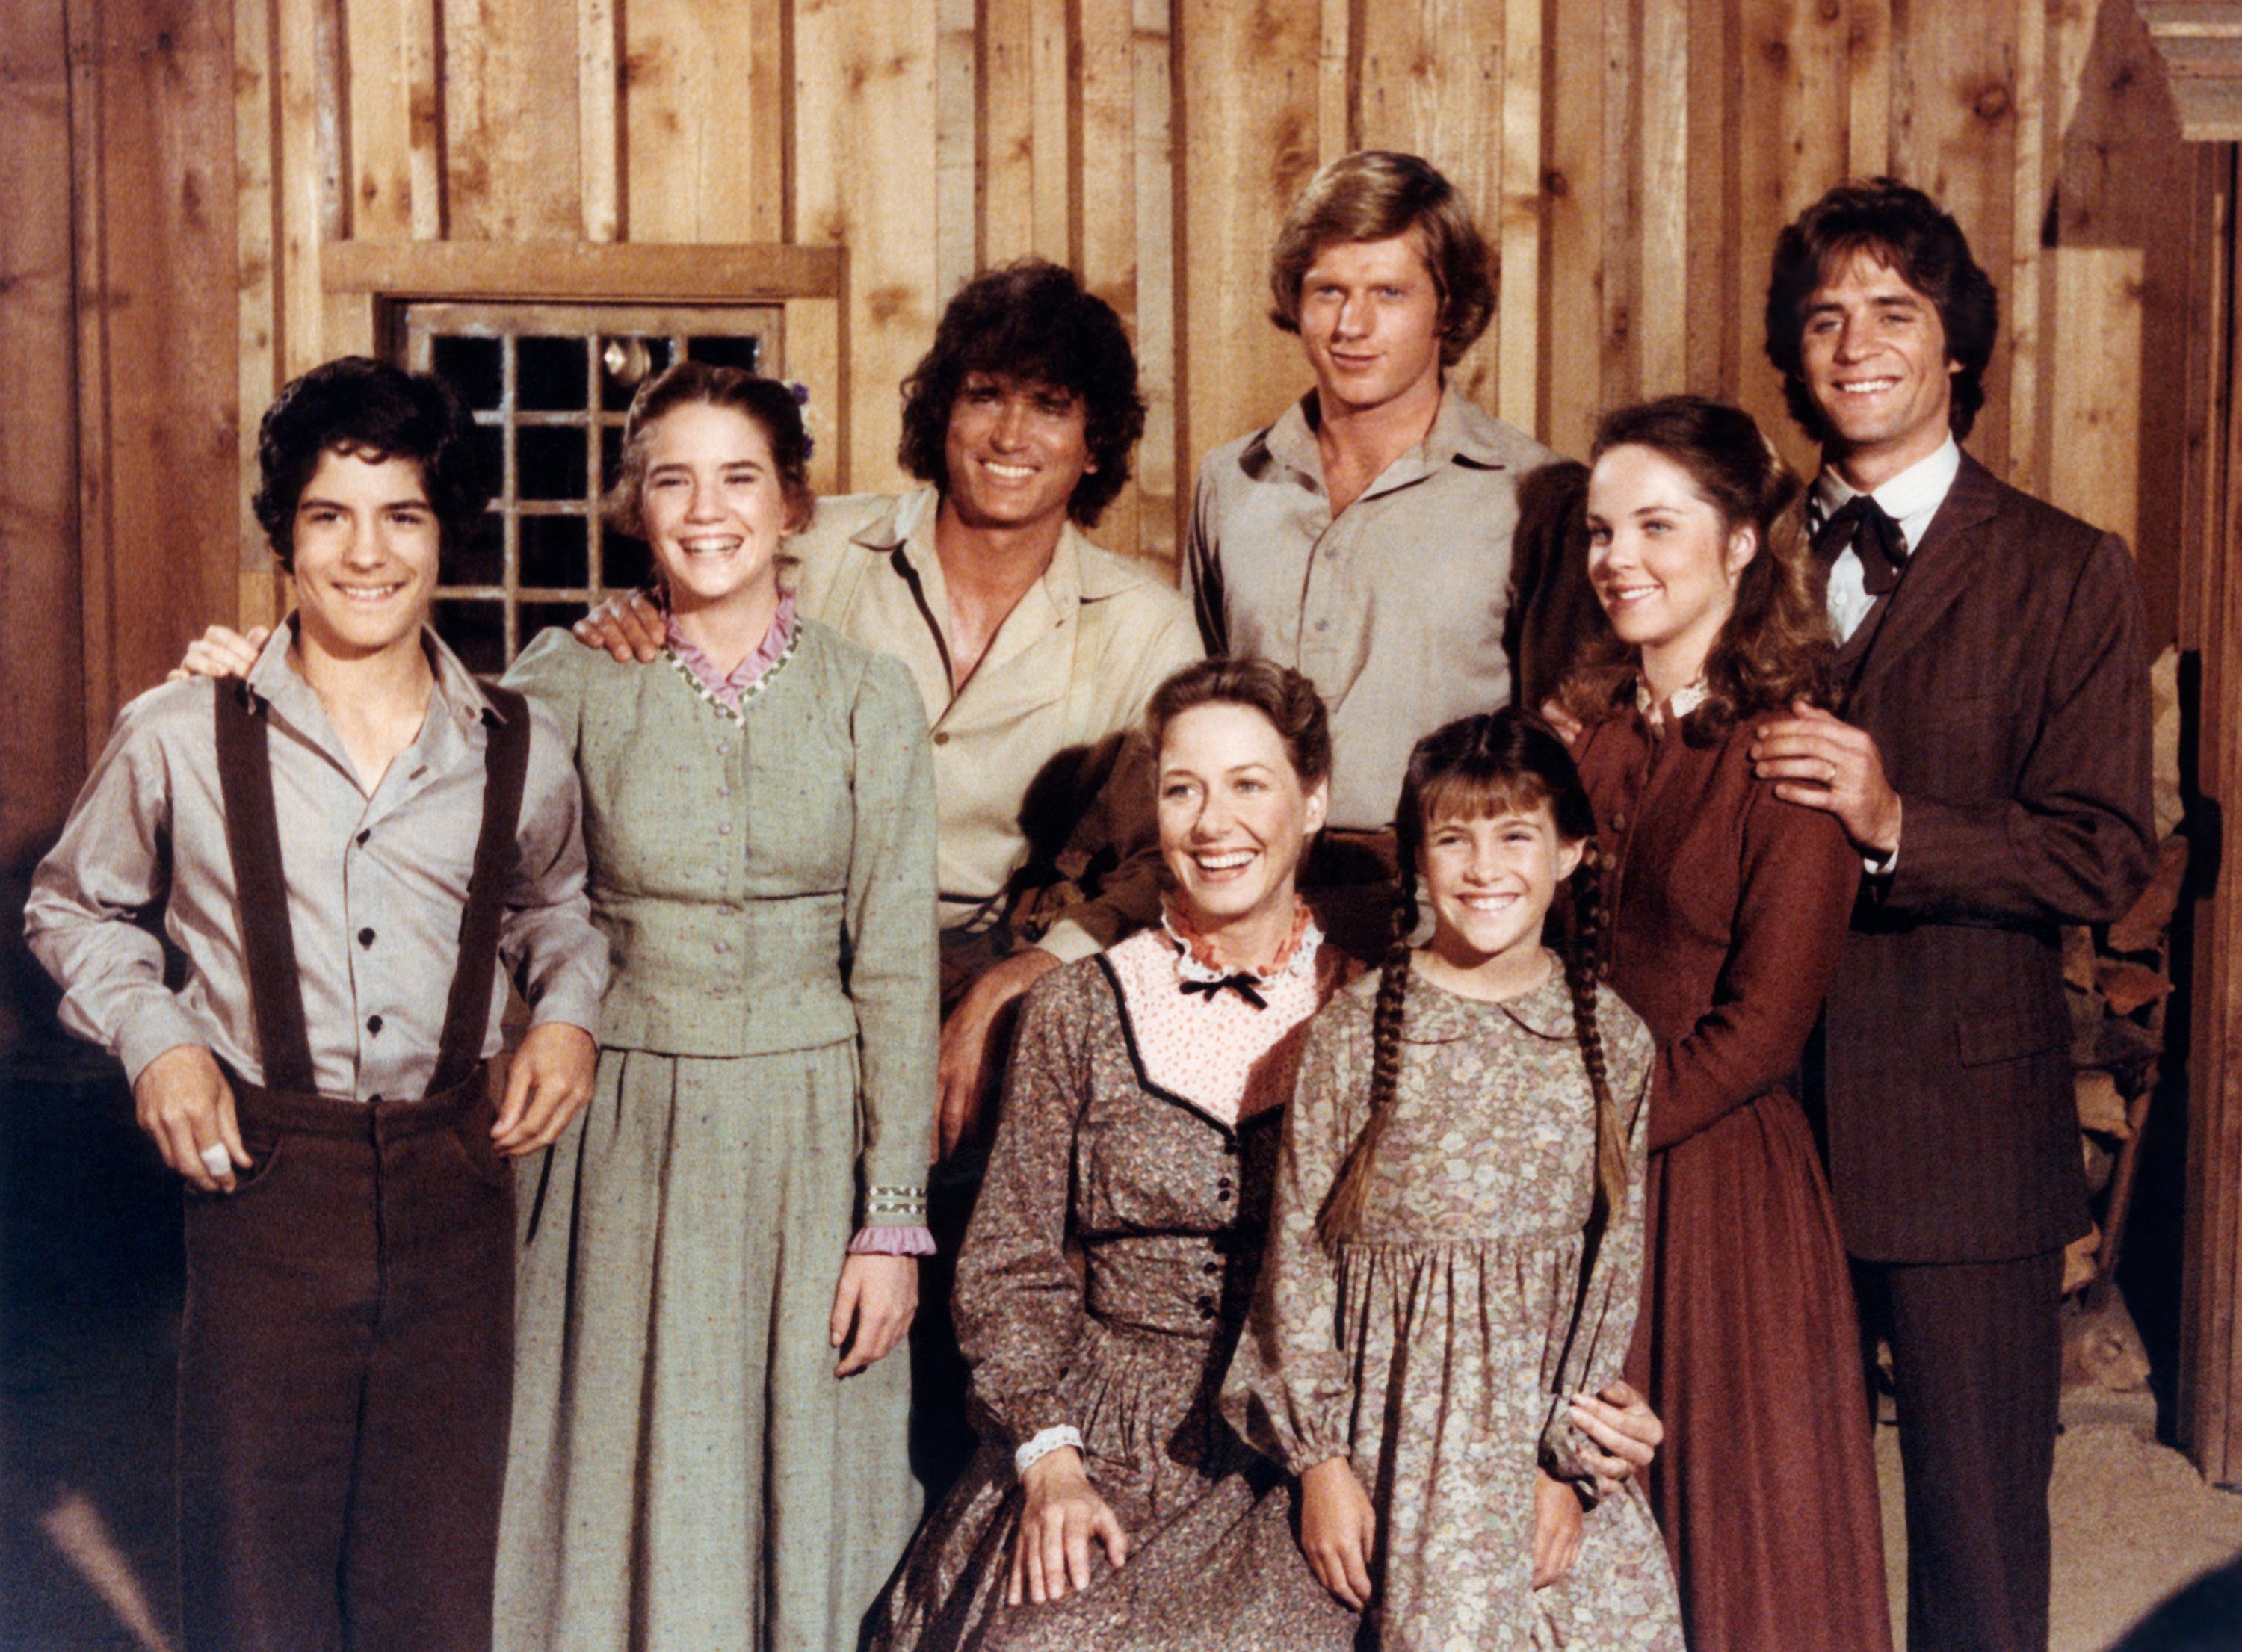 Karen Grassle poses with the 'Little House on the Prairie' cast  